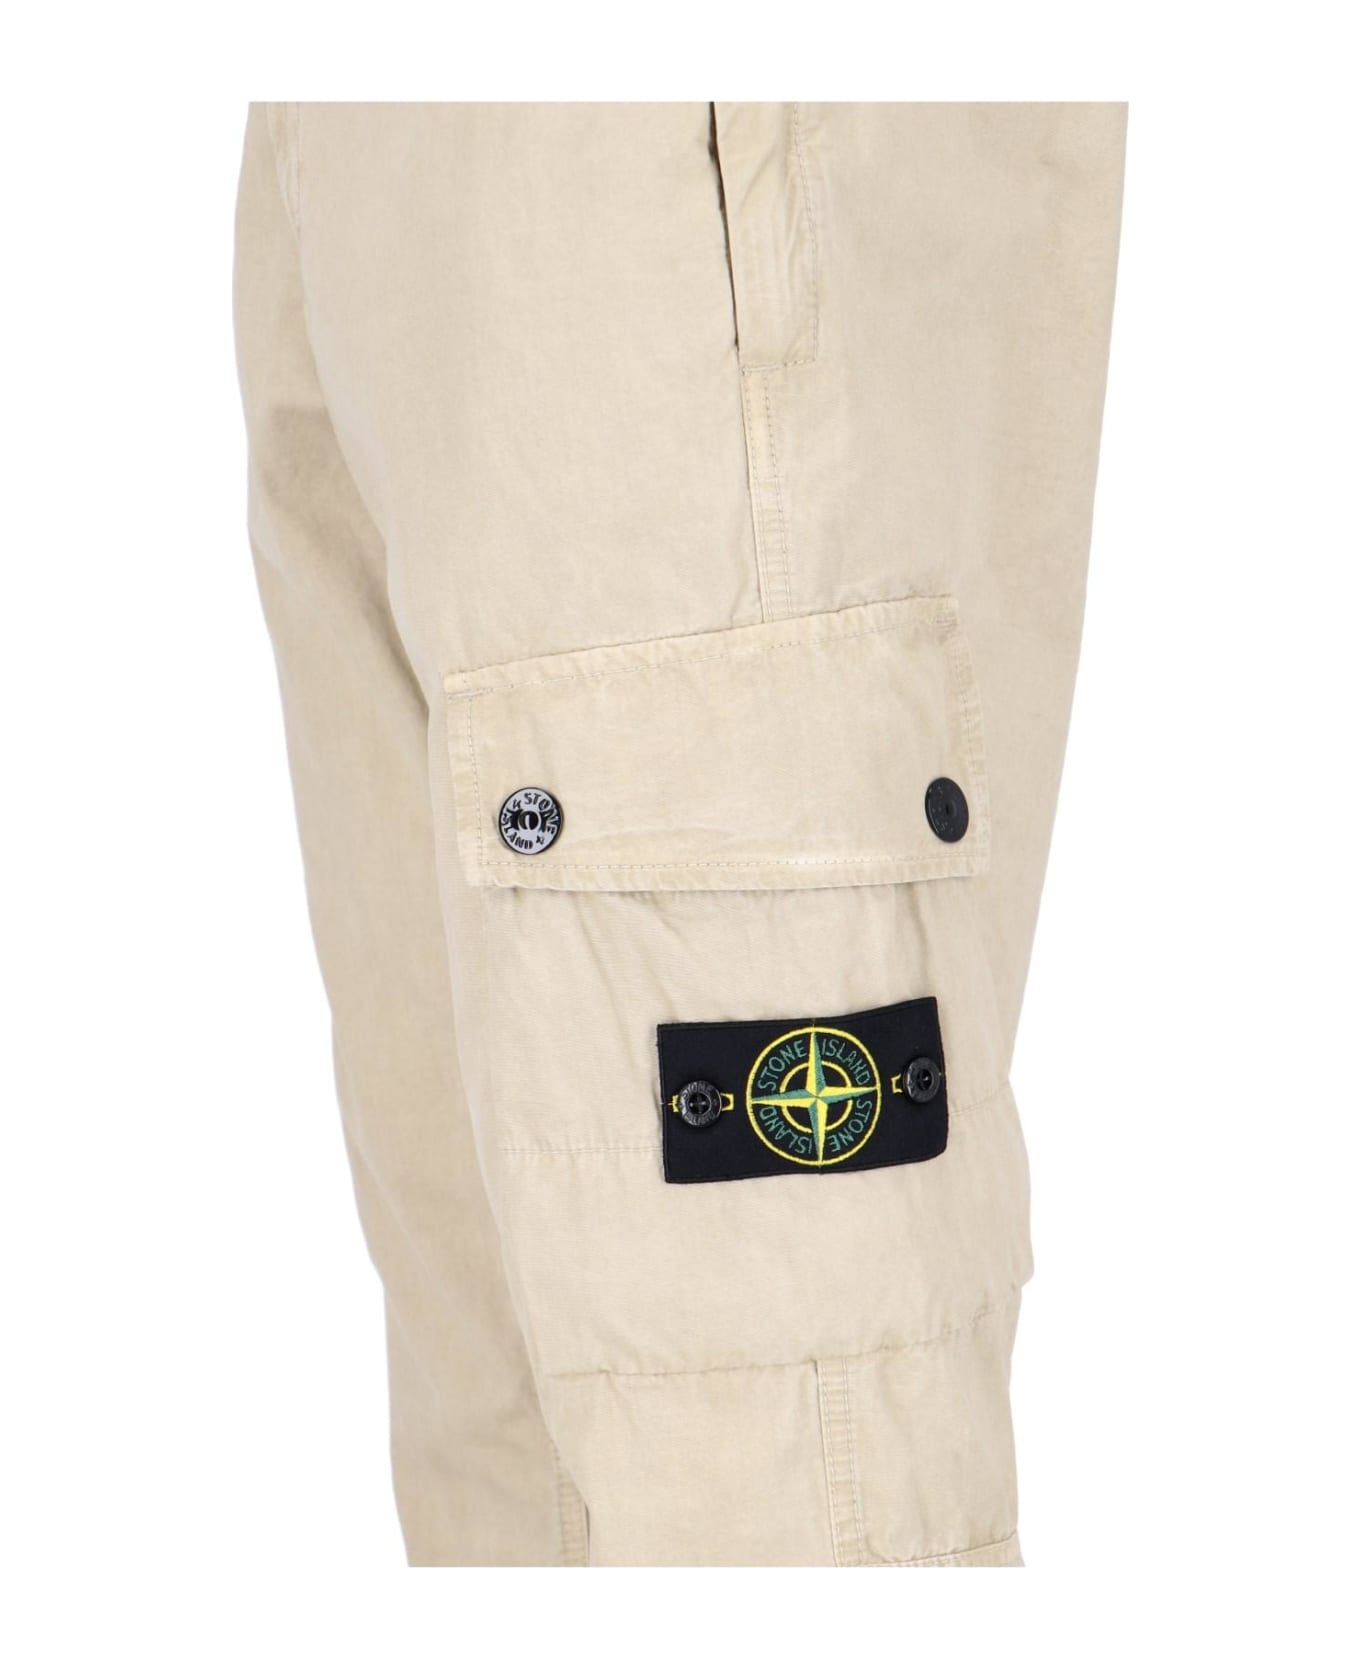 Stone Island Slim-fit Cotton Cargo Trousers - Beige ボトムス